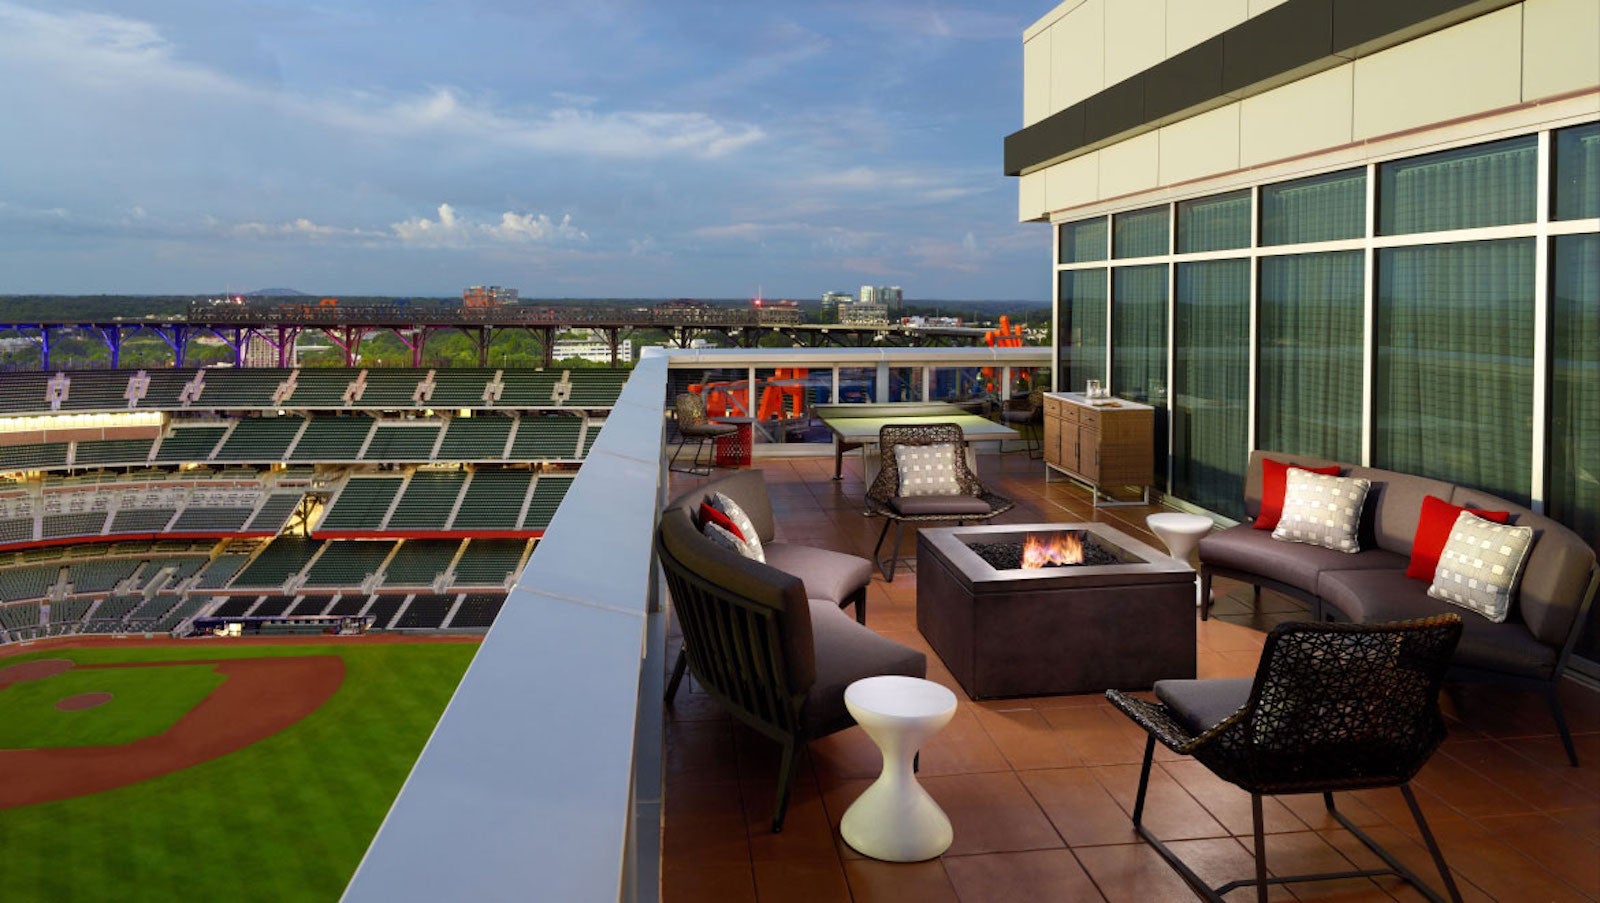 Hotels near baseball stadiums offering a home run stay on game day